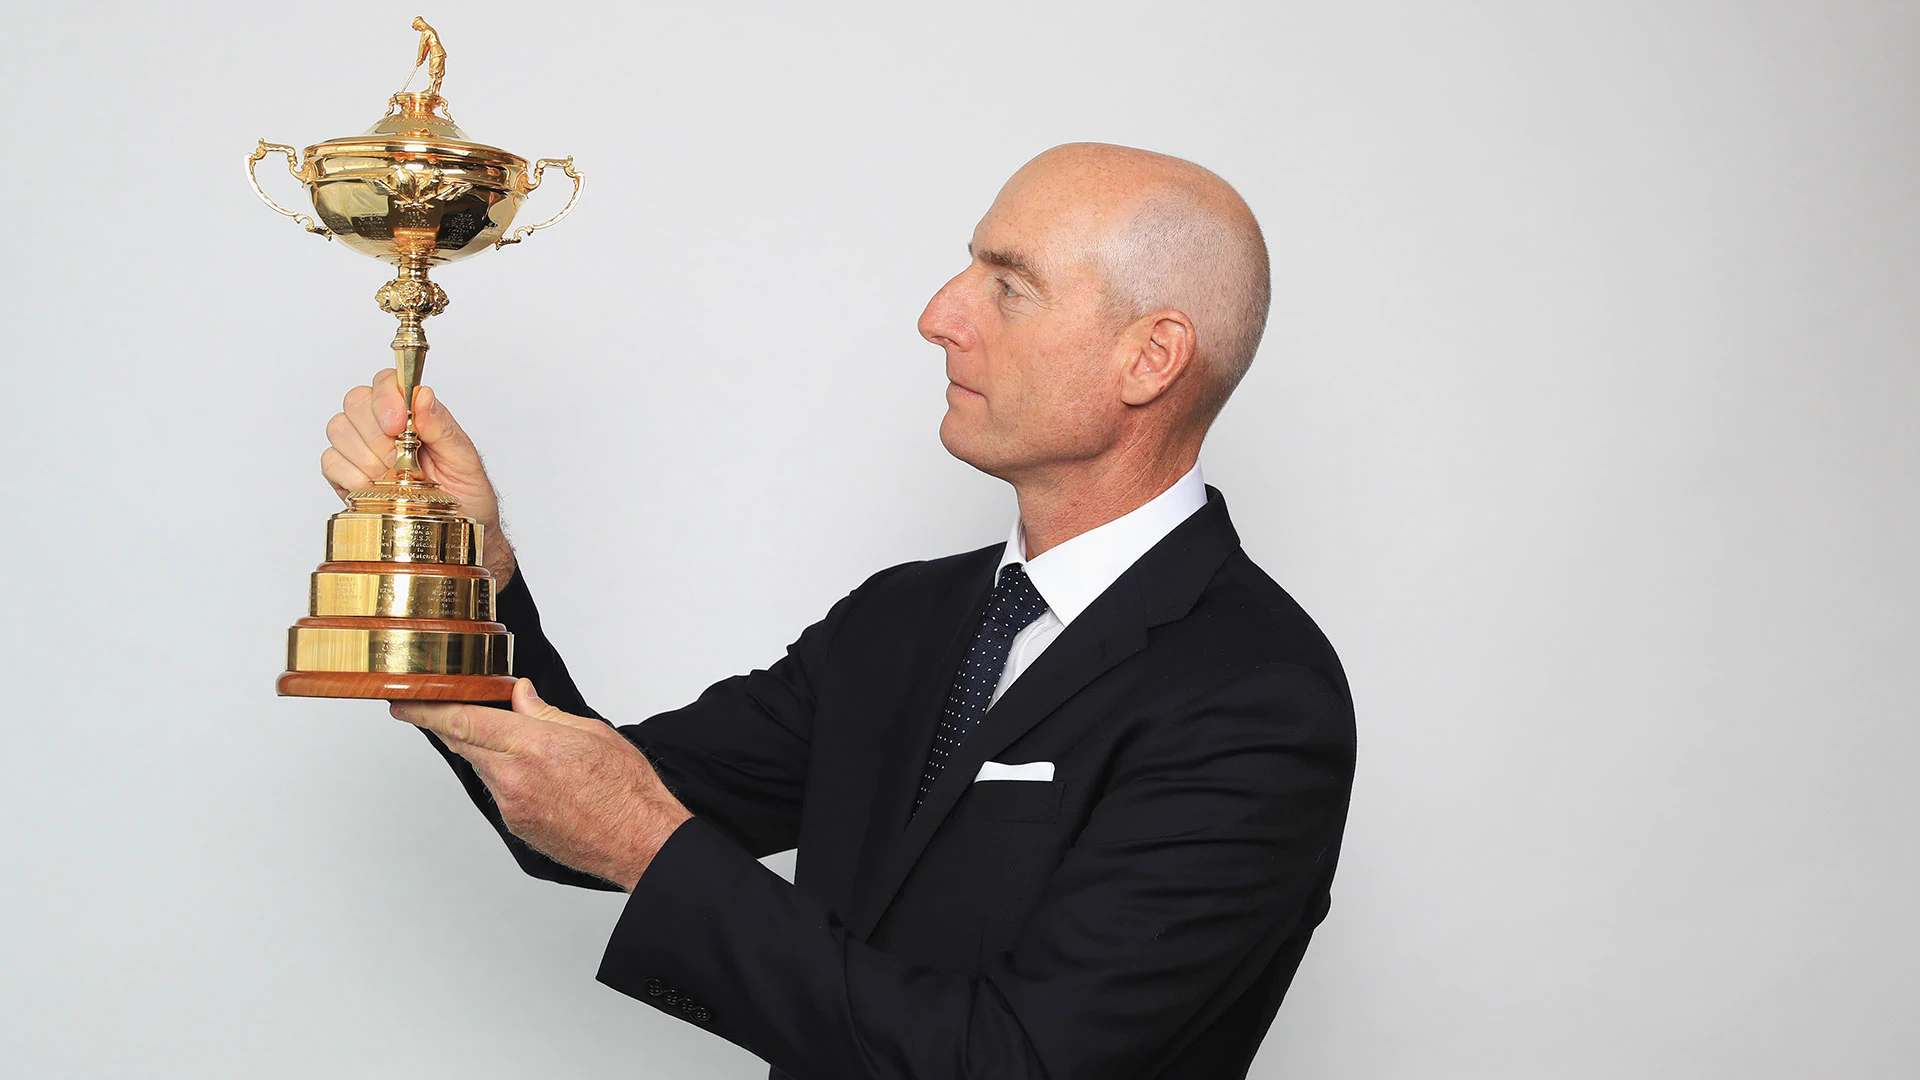 Coincidence? Furyk paired with Ryder Cup hopefuls